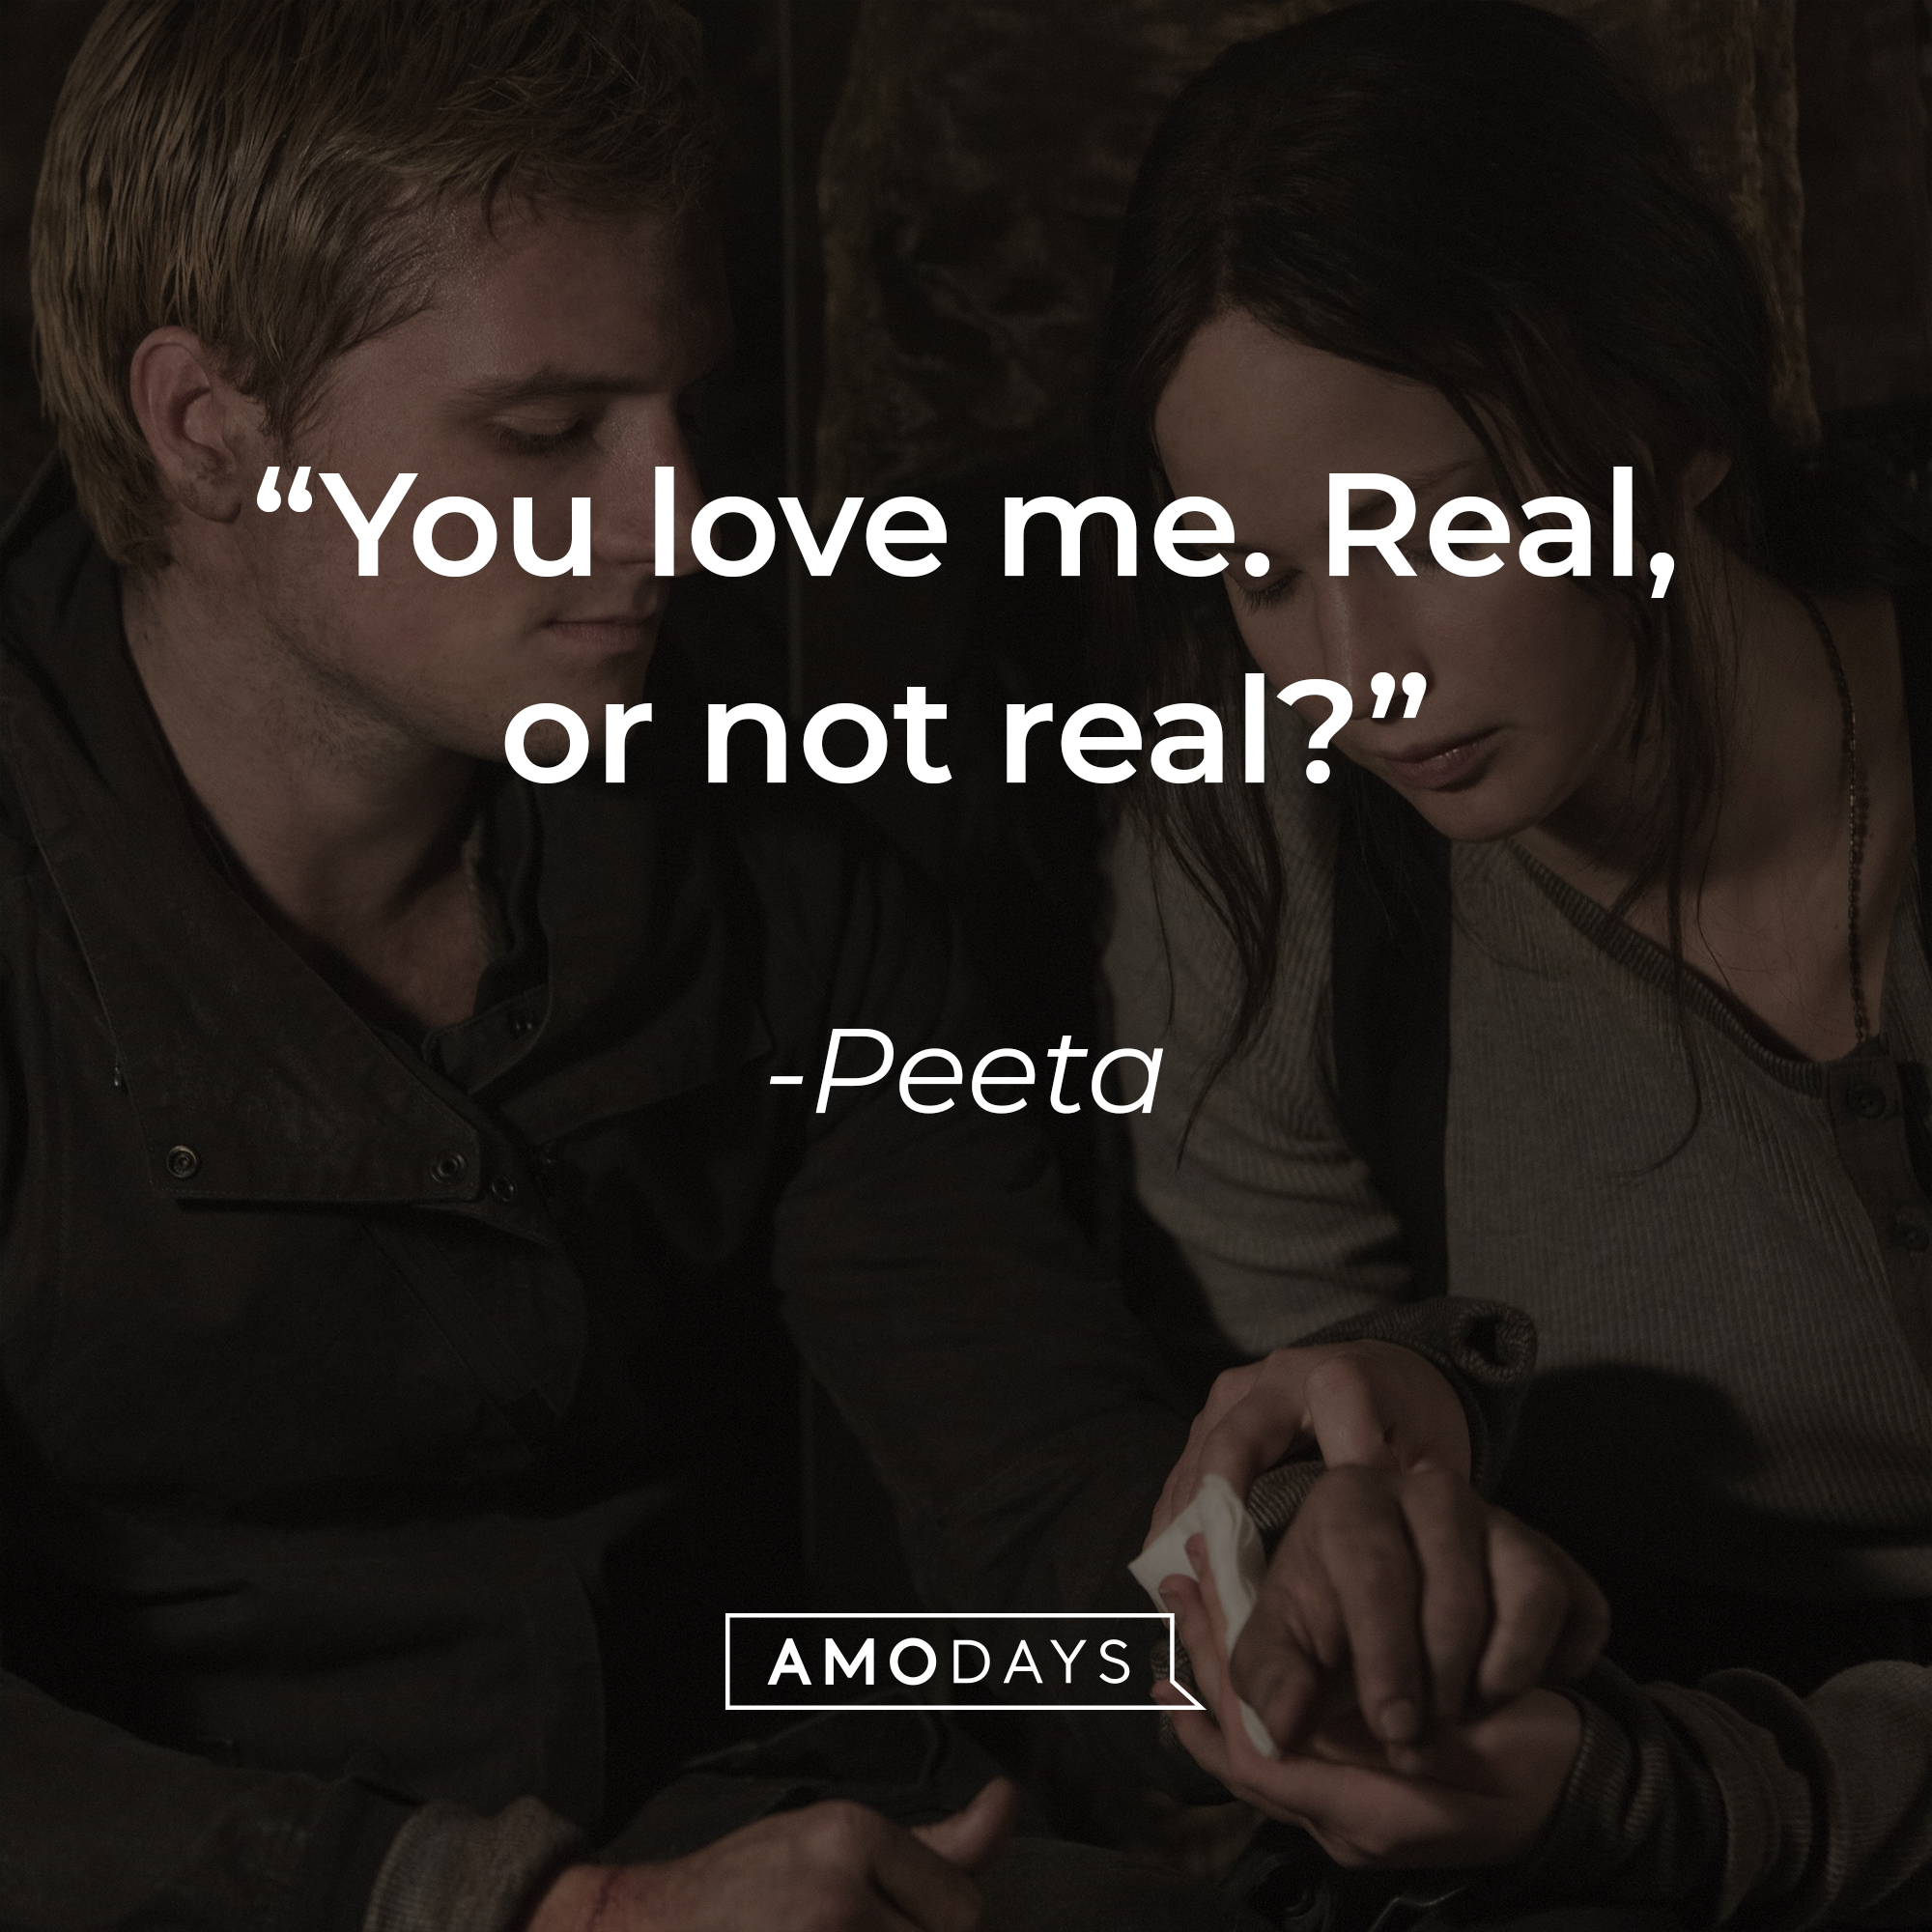 Peeta's quote: "You love me. Real, or not real?" | Source: facebook.com/TheHungerGamesMovie